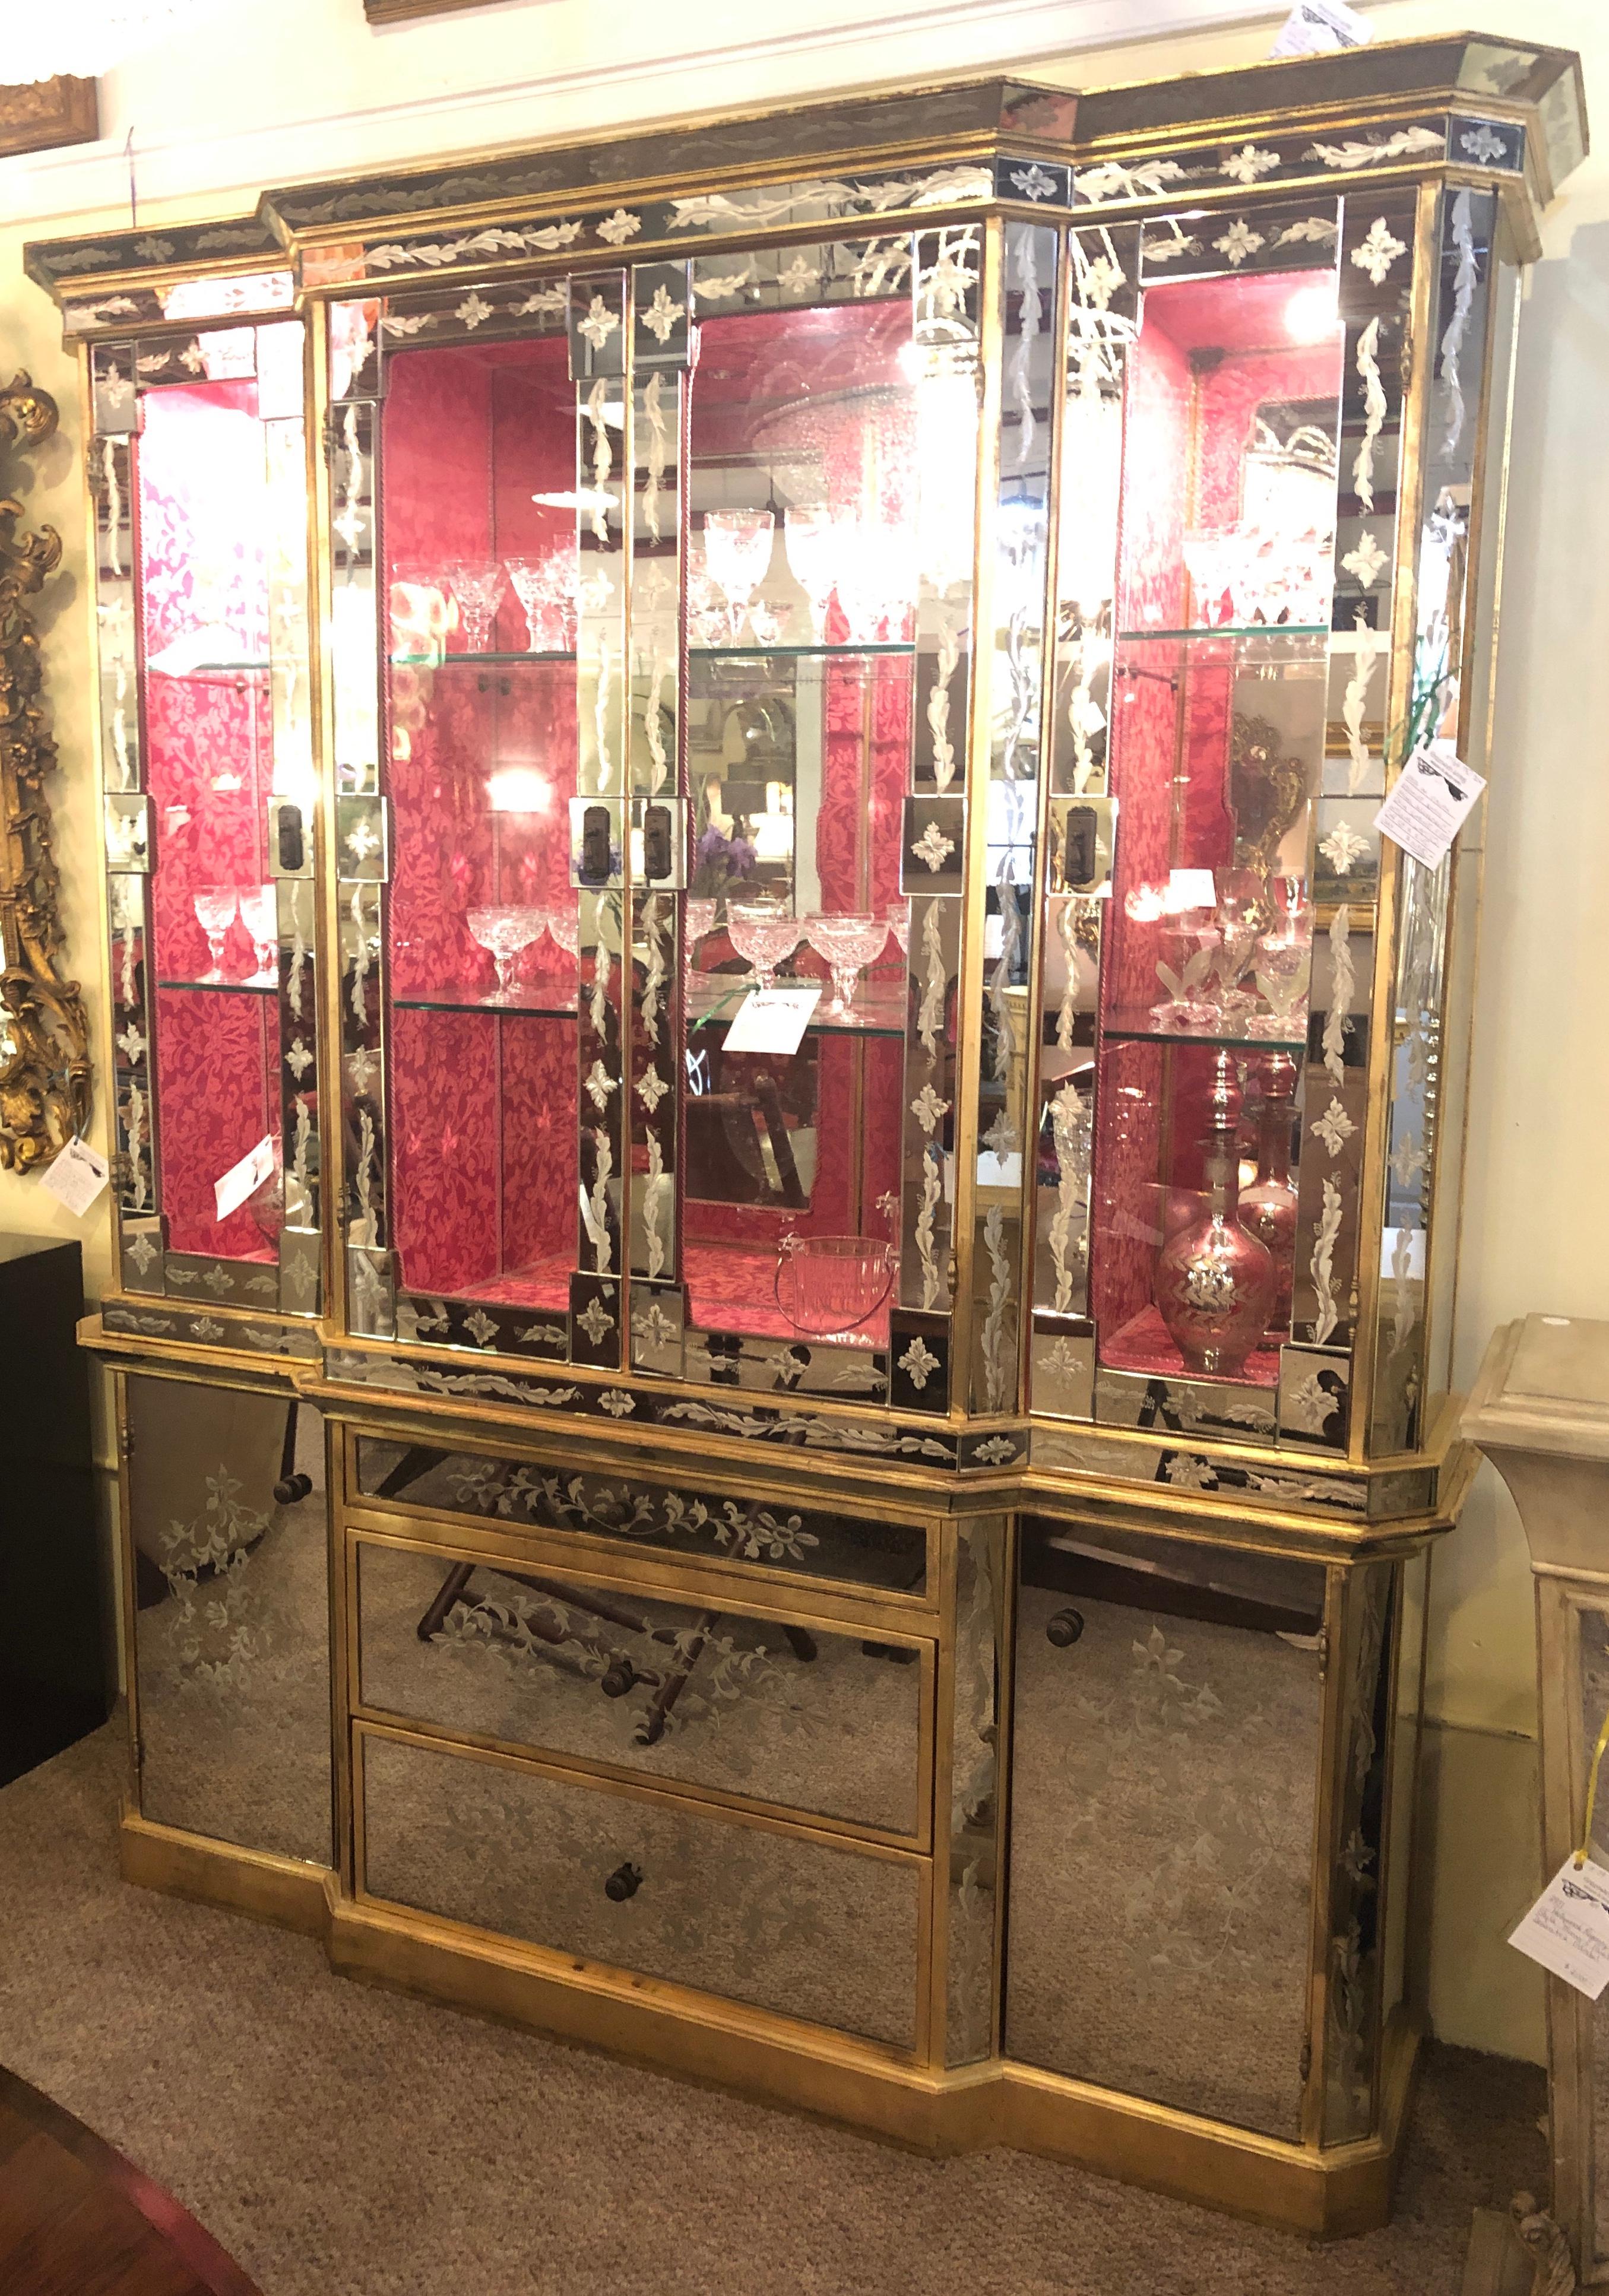 An Italian églomisé glass and mirrored panel breakfront / sideboard or China cabinet. This spectacular Hollywood Regency etched glass and églomisé cabinet simply defines sleek and stylish. The mirrored all around sideboard having three drawers, the